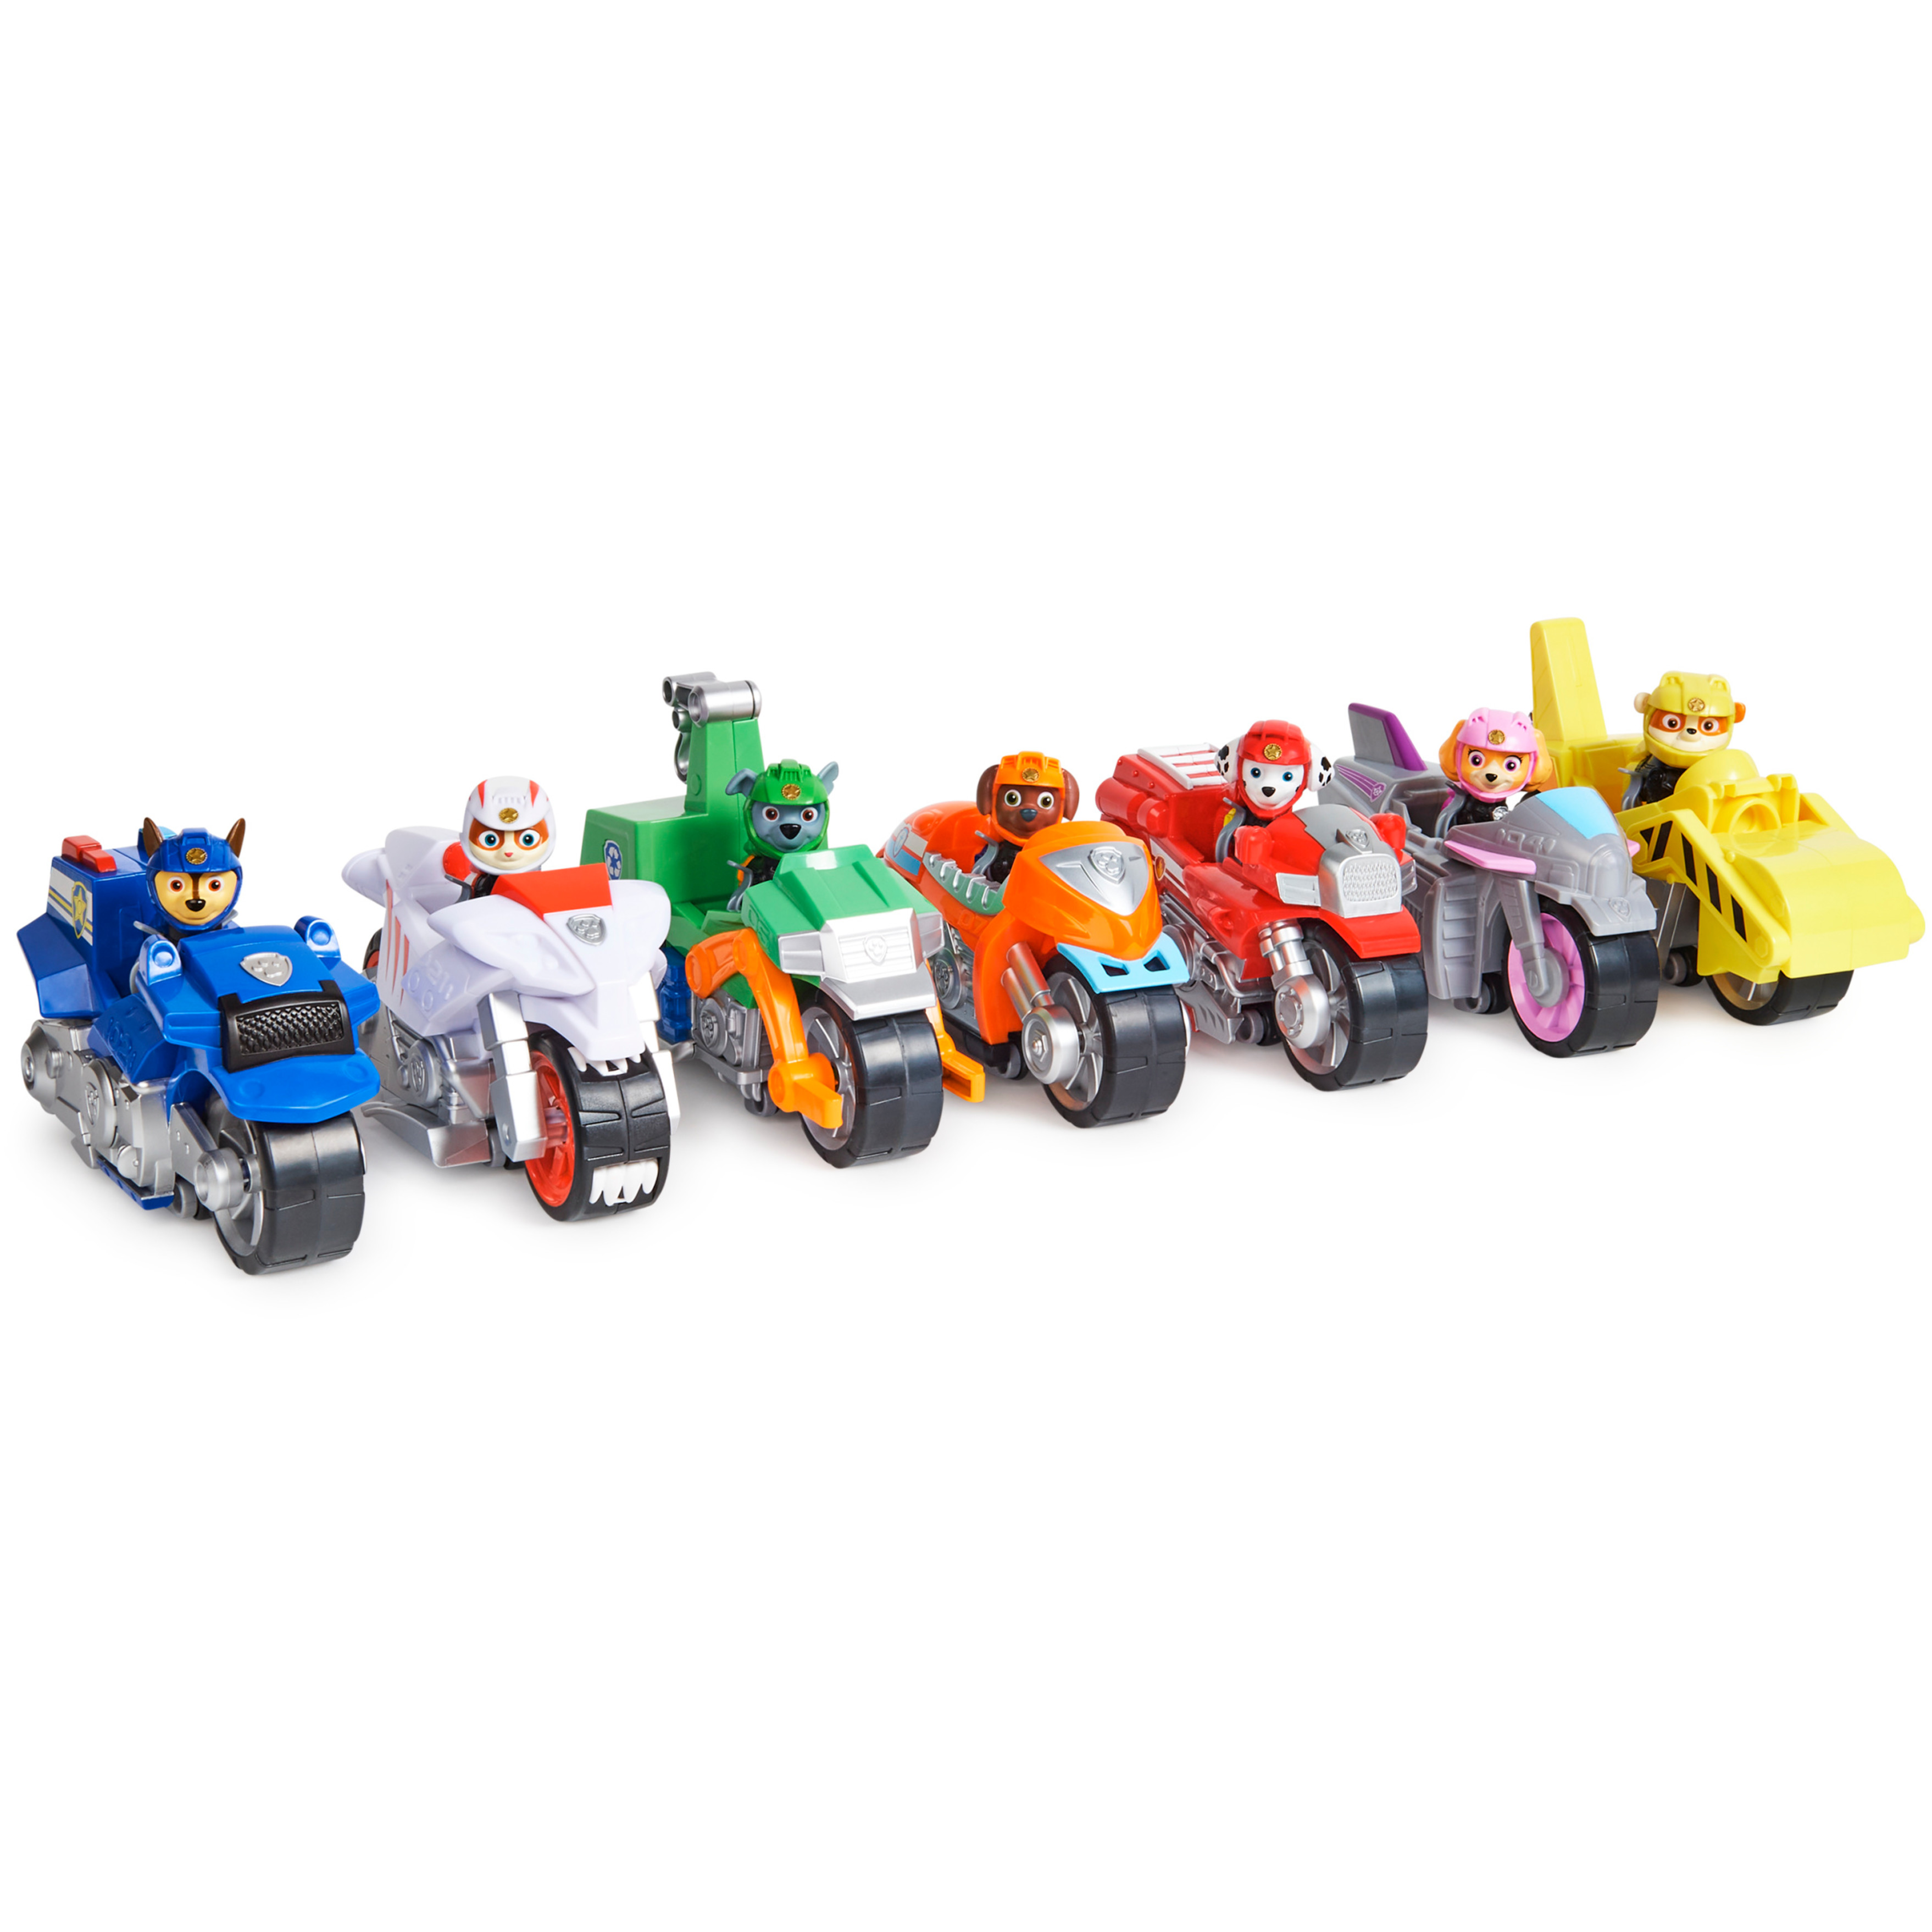 PAW Patrol, Moto Pups Chase’s Deluxe Pull Back Motorcycle Vehicle with Wheelie Feature and Figure - image 7 of 7